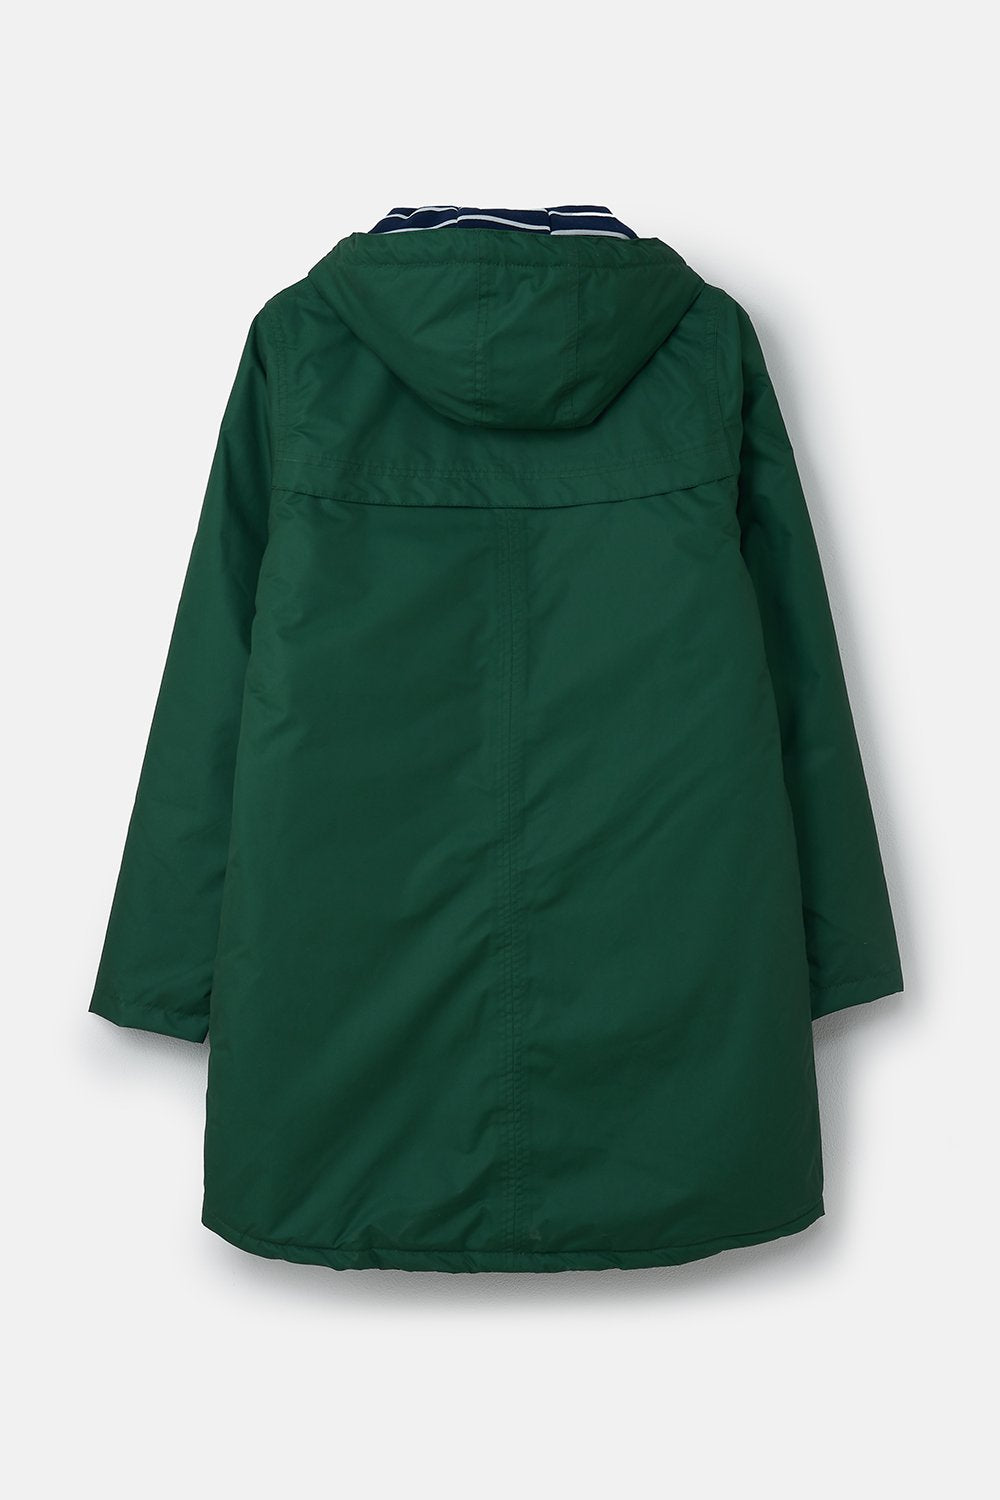 Lighthouse Iona Long Jacket in Deep Green